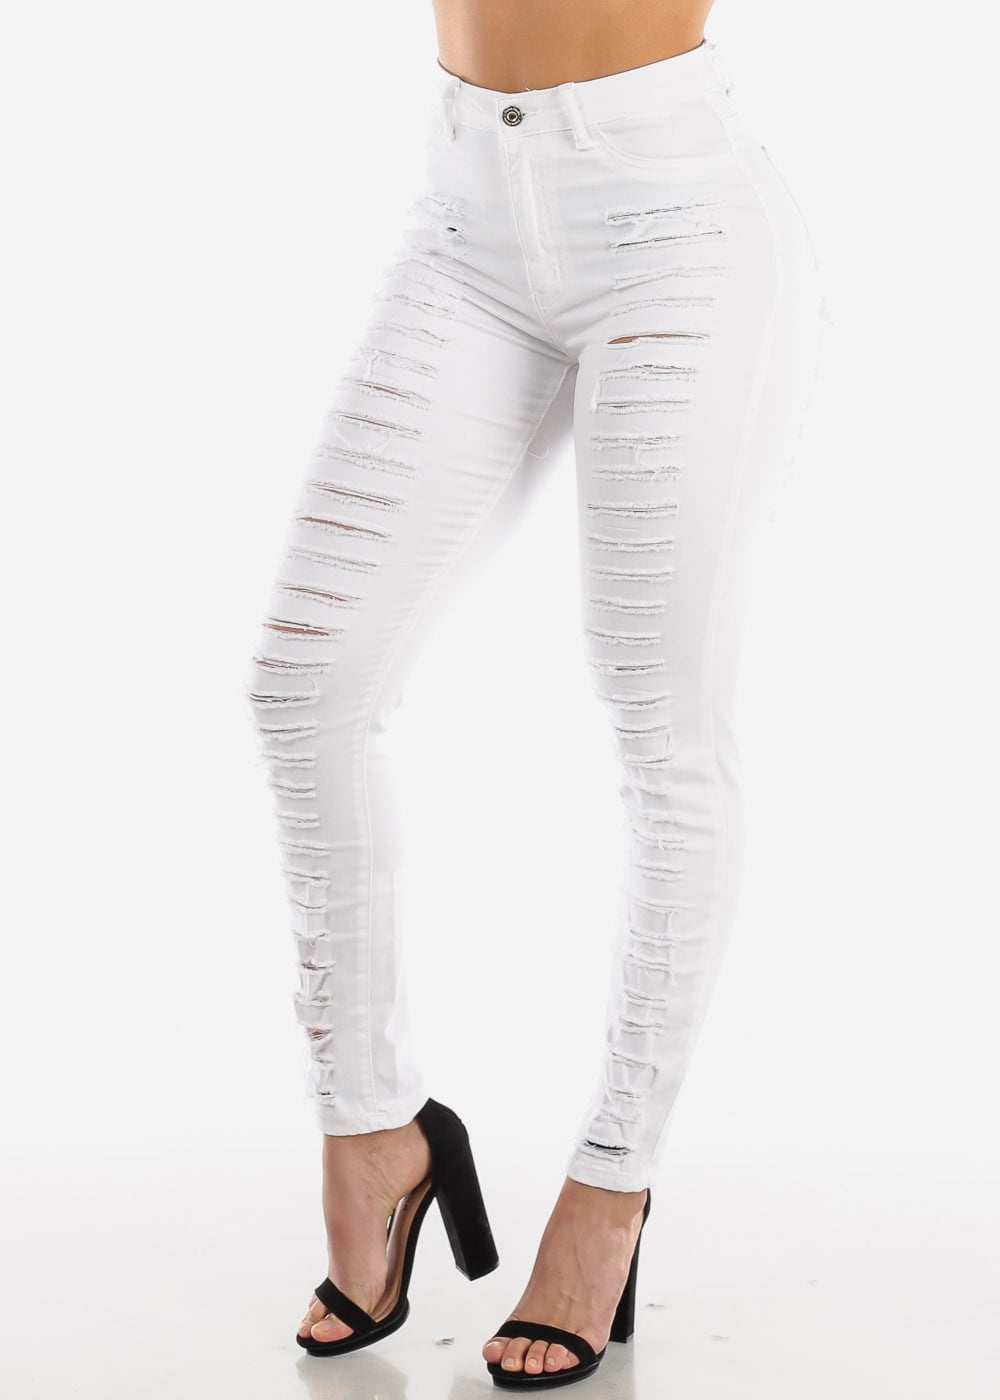 Moda Xpress - Womens Skinny Jeans High Waisted Distressed Torn White ...